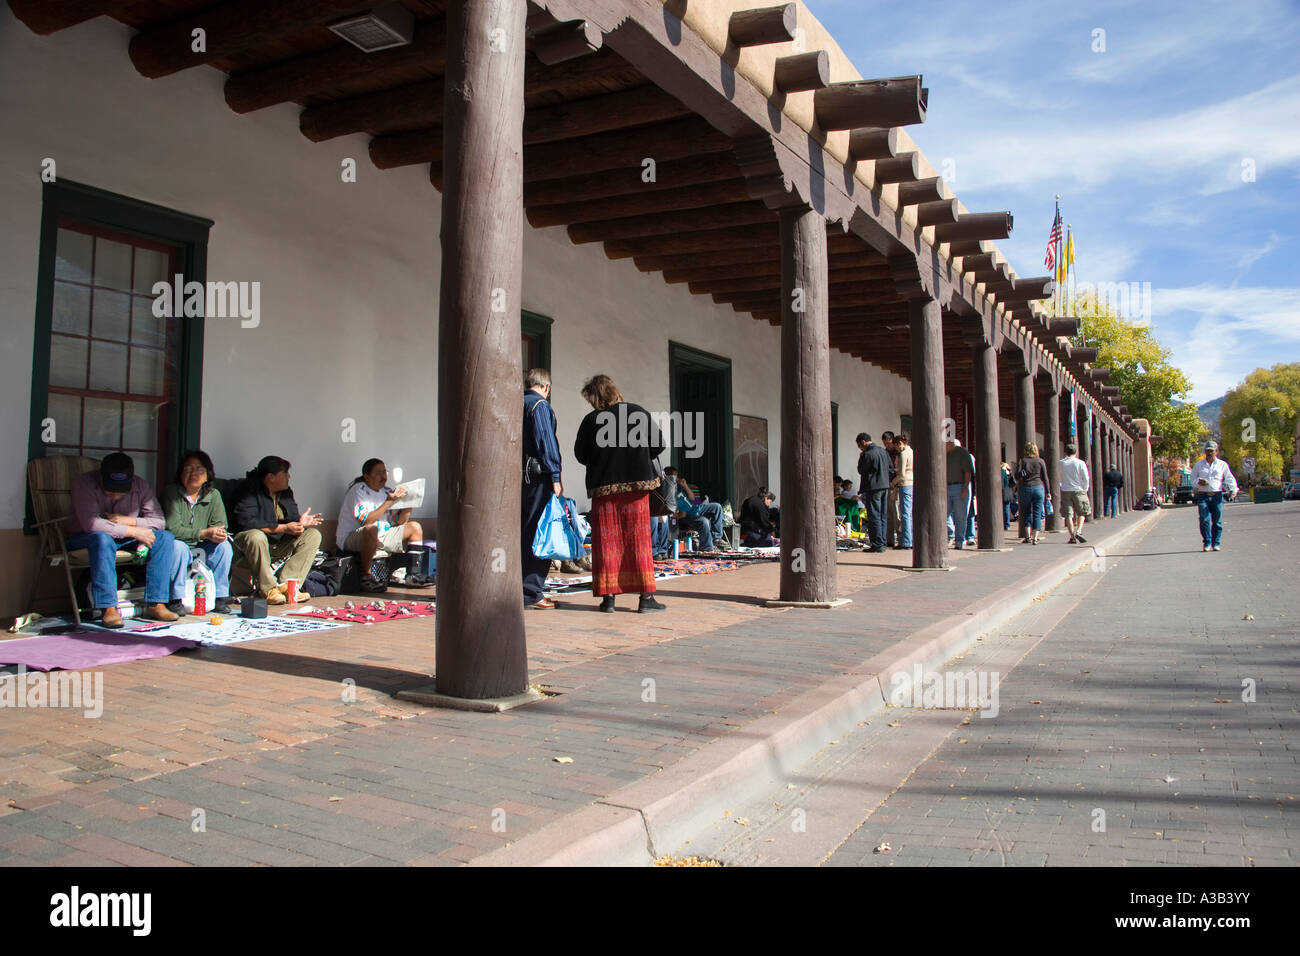 USA New Mexico Santa Fe Governors Palace Native American Pueblo Indian market stalls under the arches selling local crafts Stock Photo